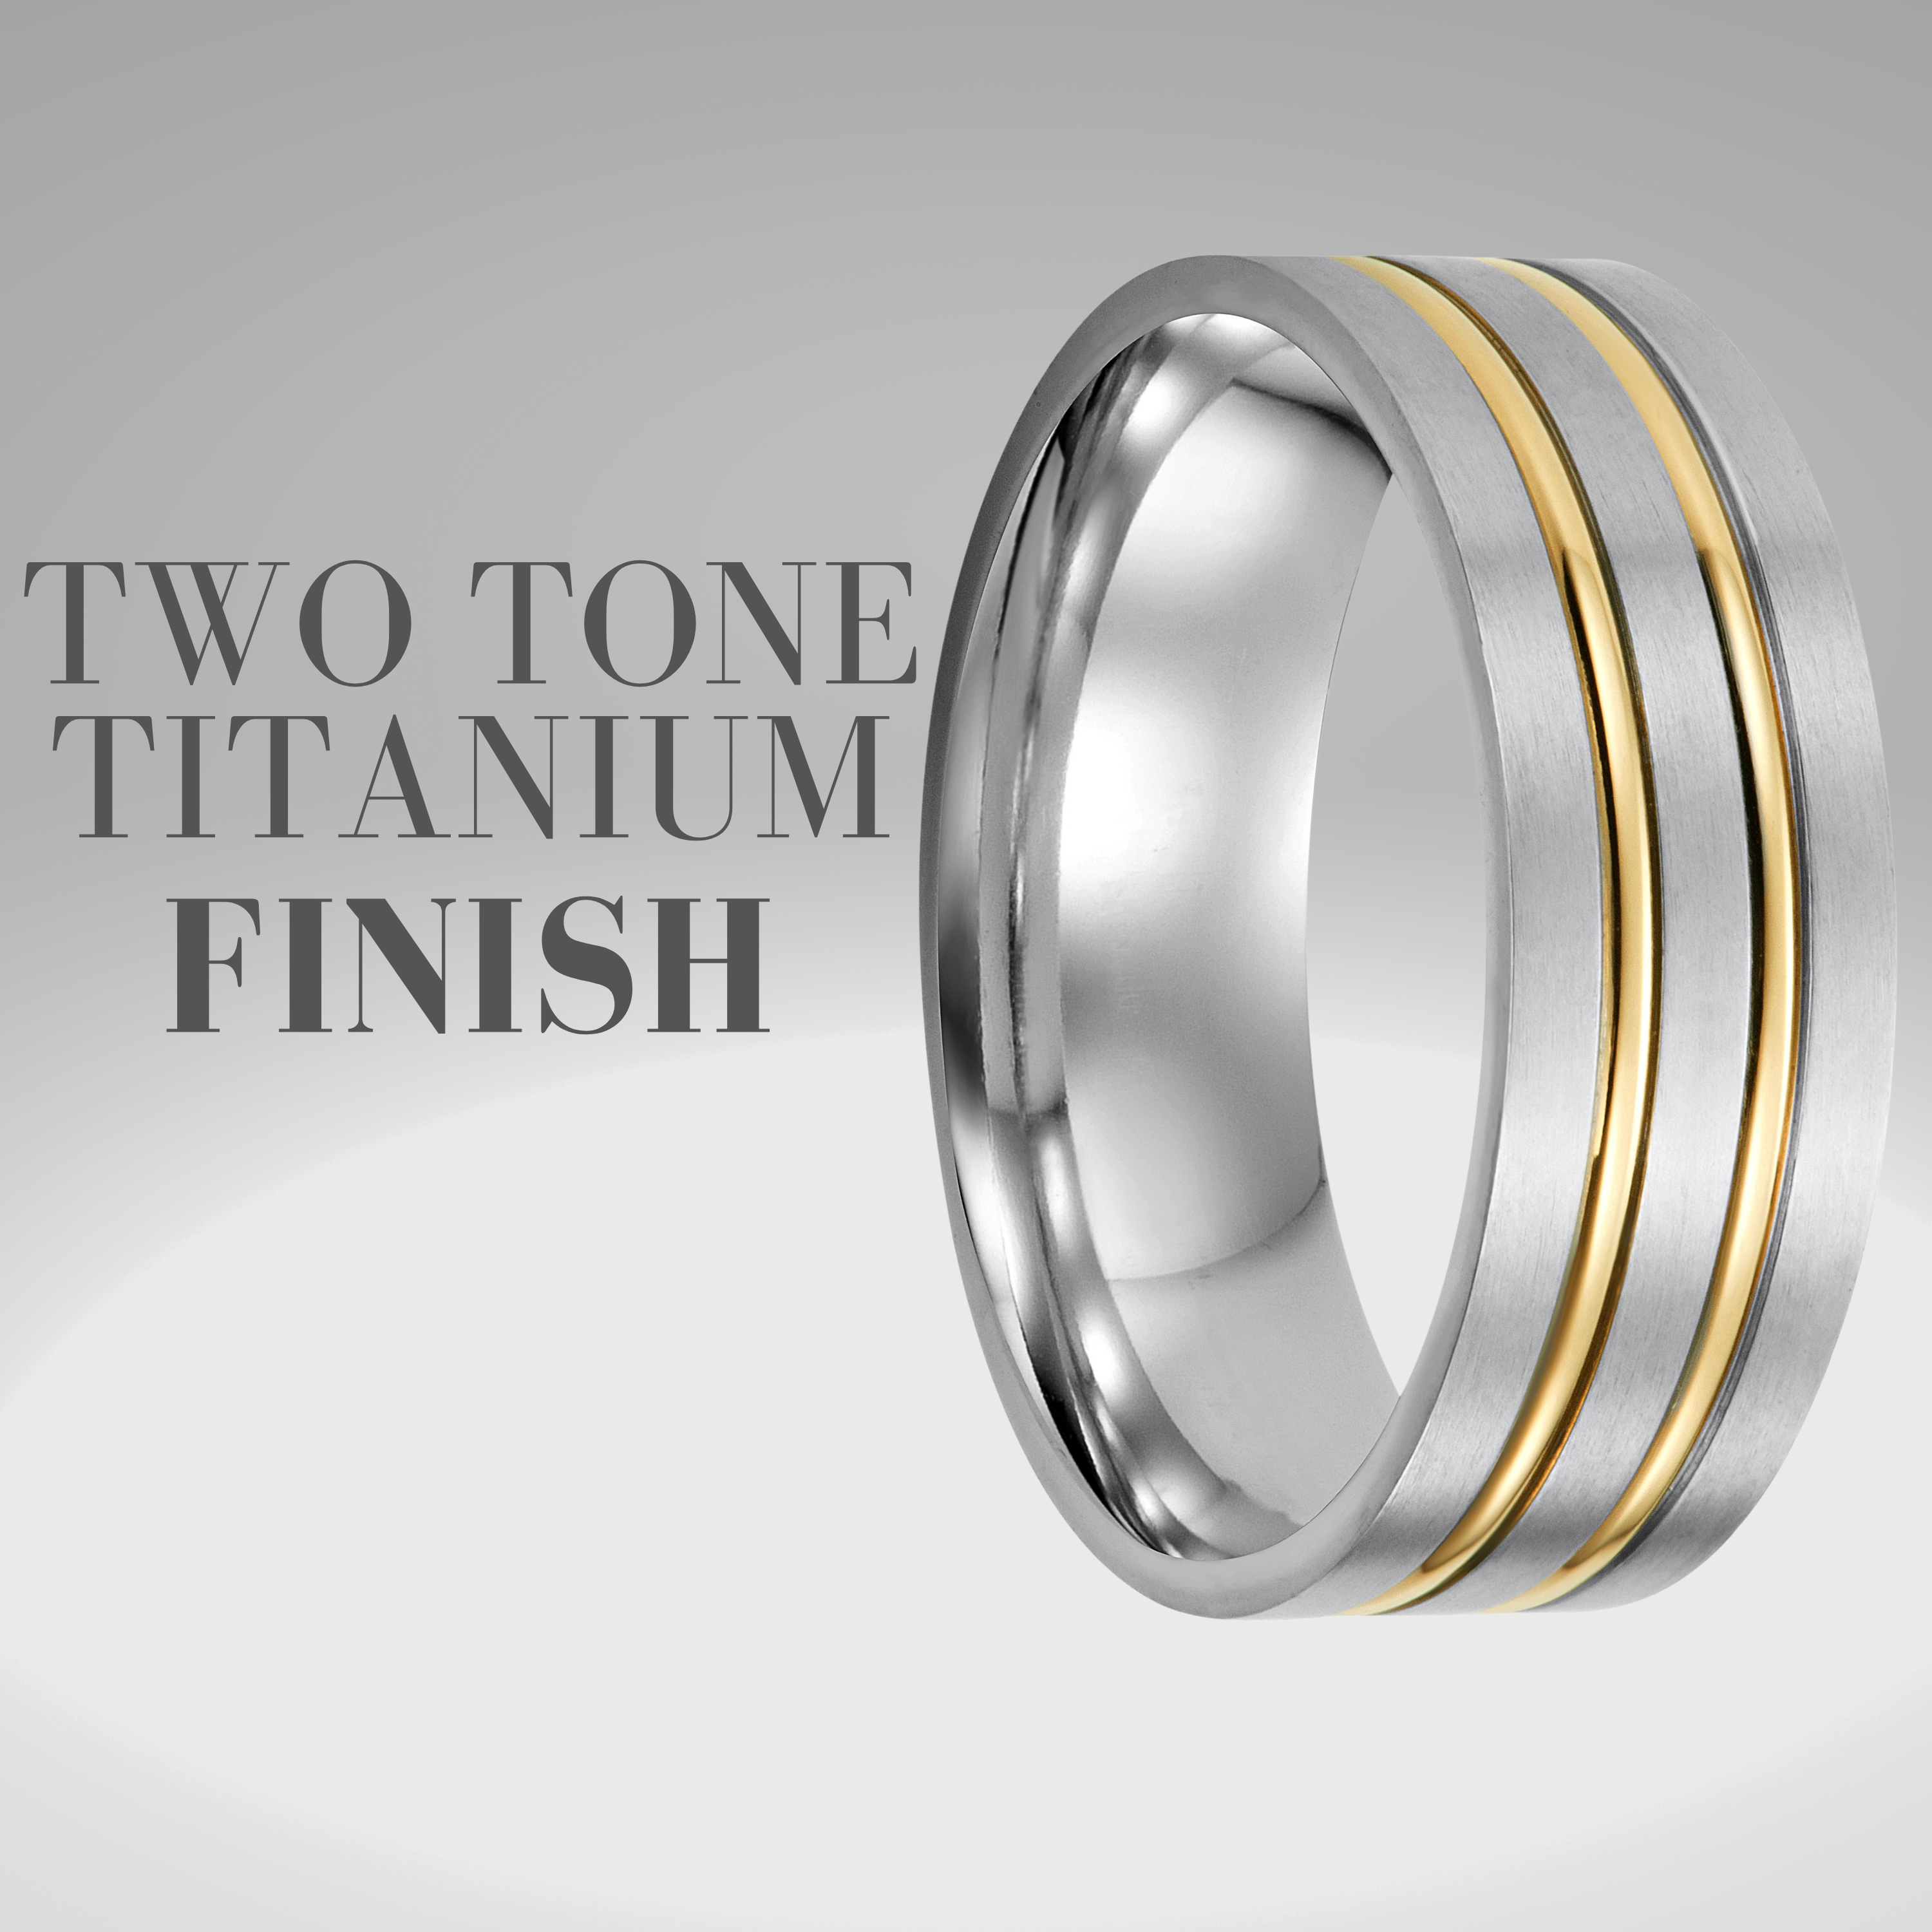 Men's Titanium Ring Two Tone Gold and Silver